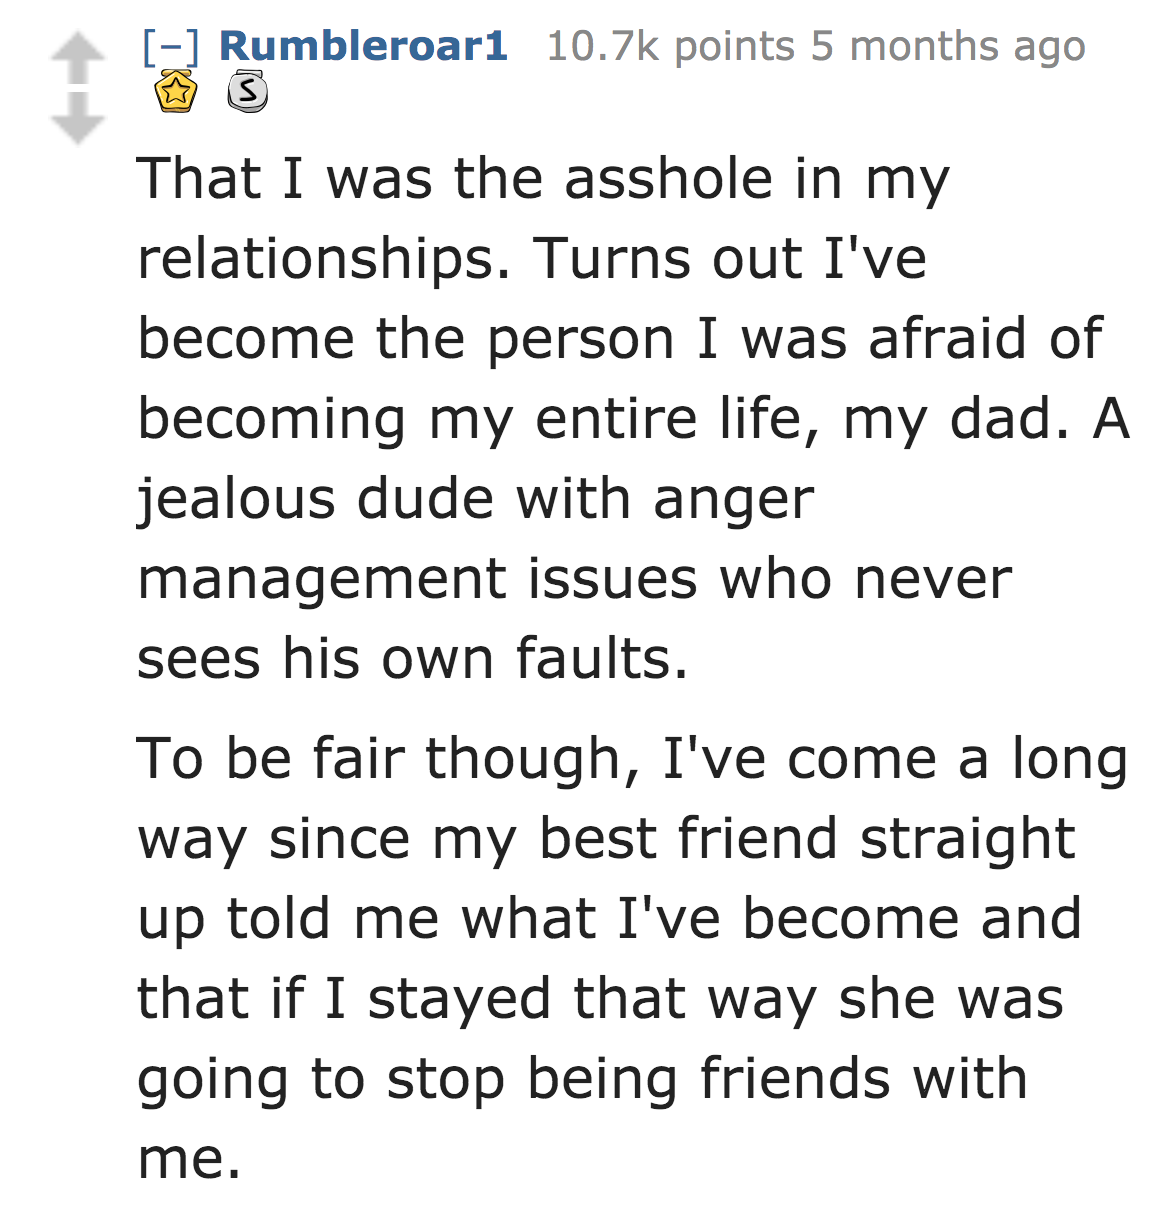 History - Rumbleroari points 5 months ago s That I was the asshole in my relationships. Turns out I've become the person I was afraid of becoming my entire life, my dad. A jealous dude with anger management issues who never sees his own faults. To be fair